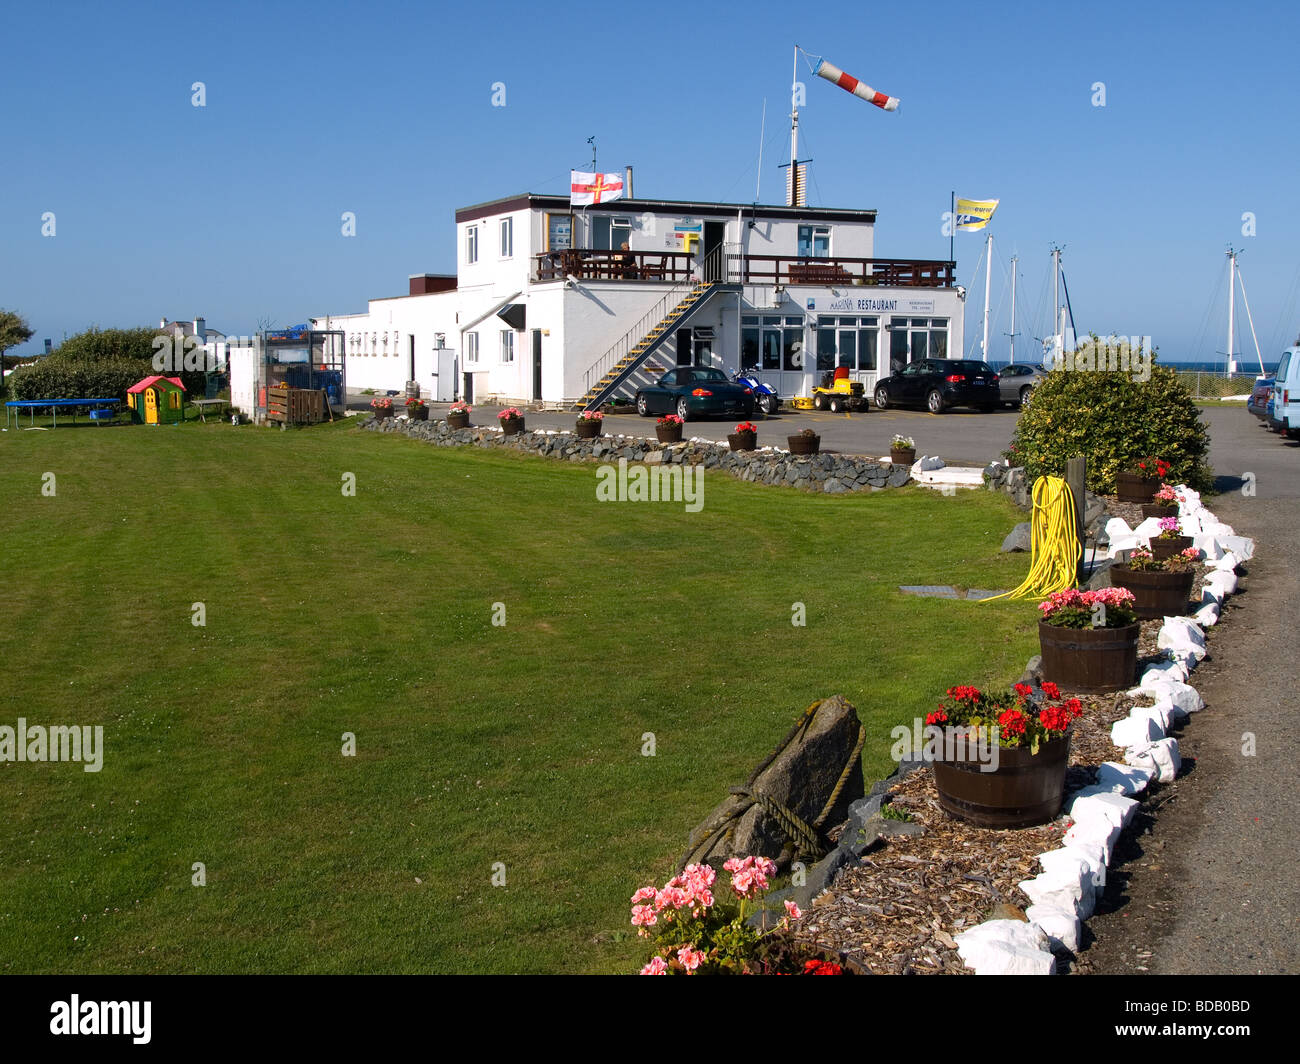 Ingresso e Club House presso Beaucette Marina Vale a Guernsey Isole del Canale Foto Stock